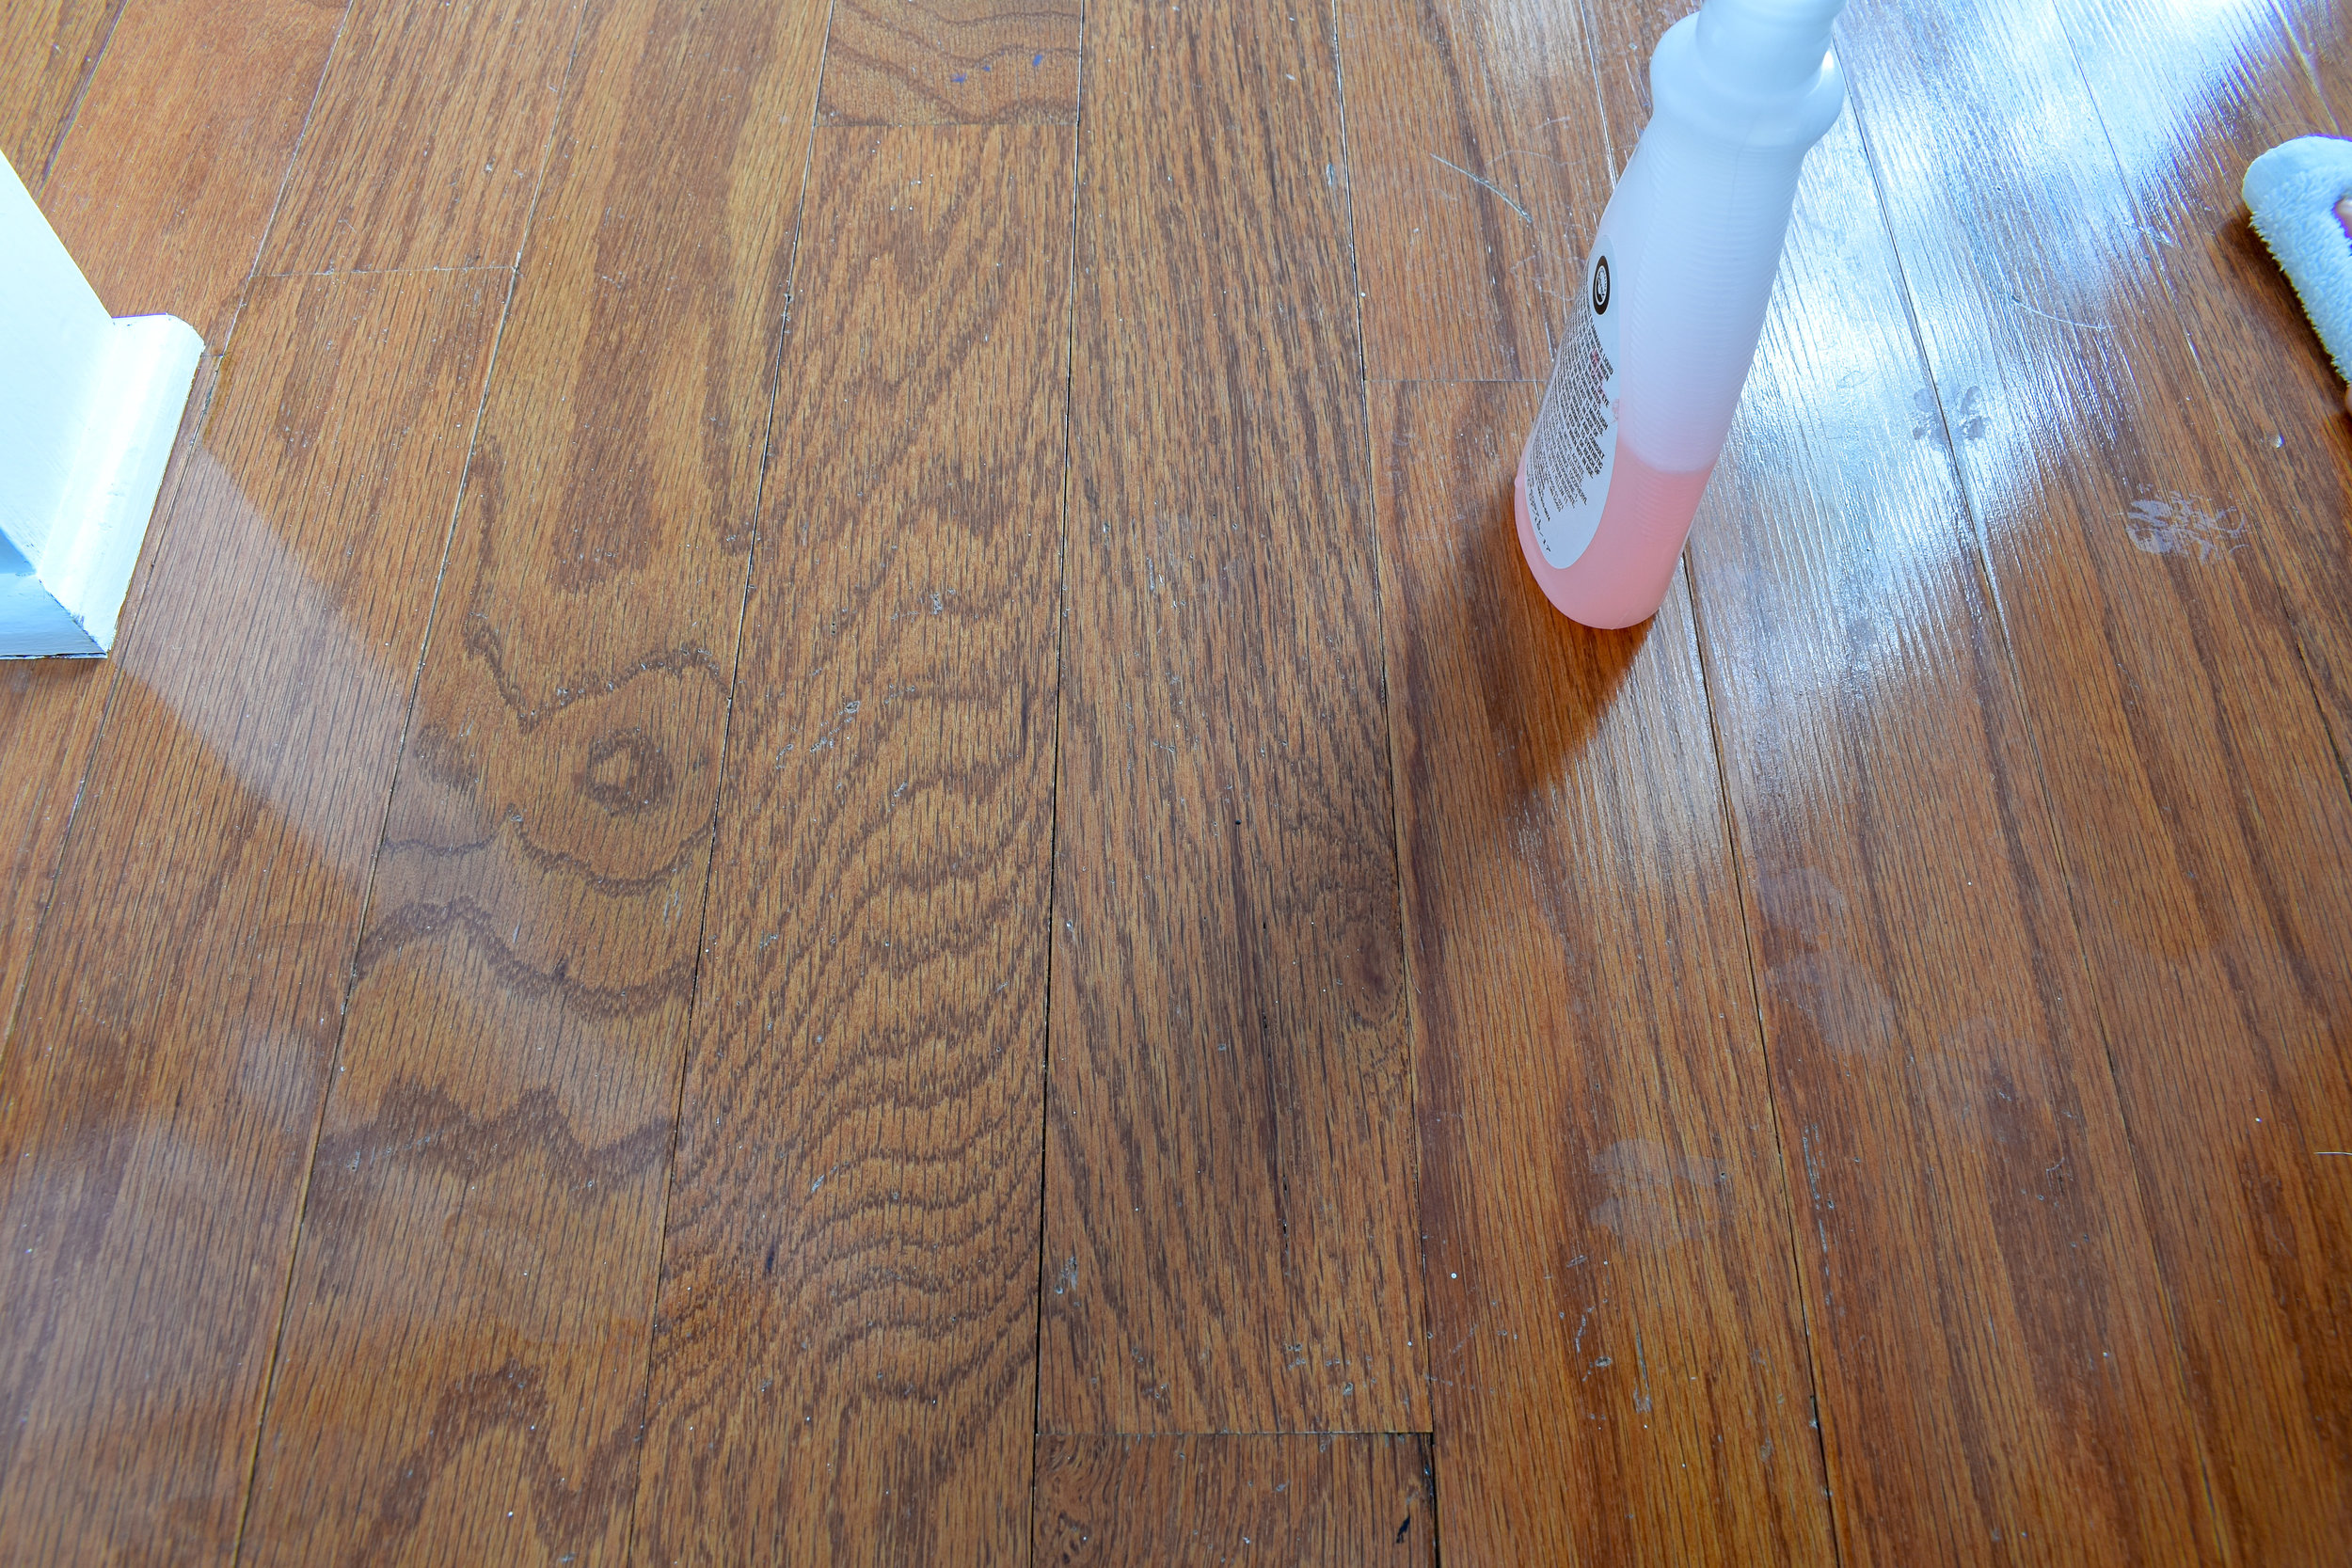 How To Make Old Hardwood Floors Shine, What To Use On Hardwood Floors To Make Them Shine